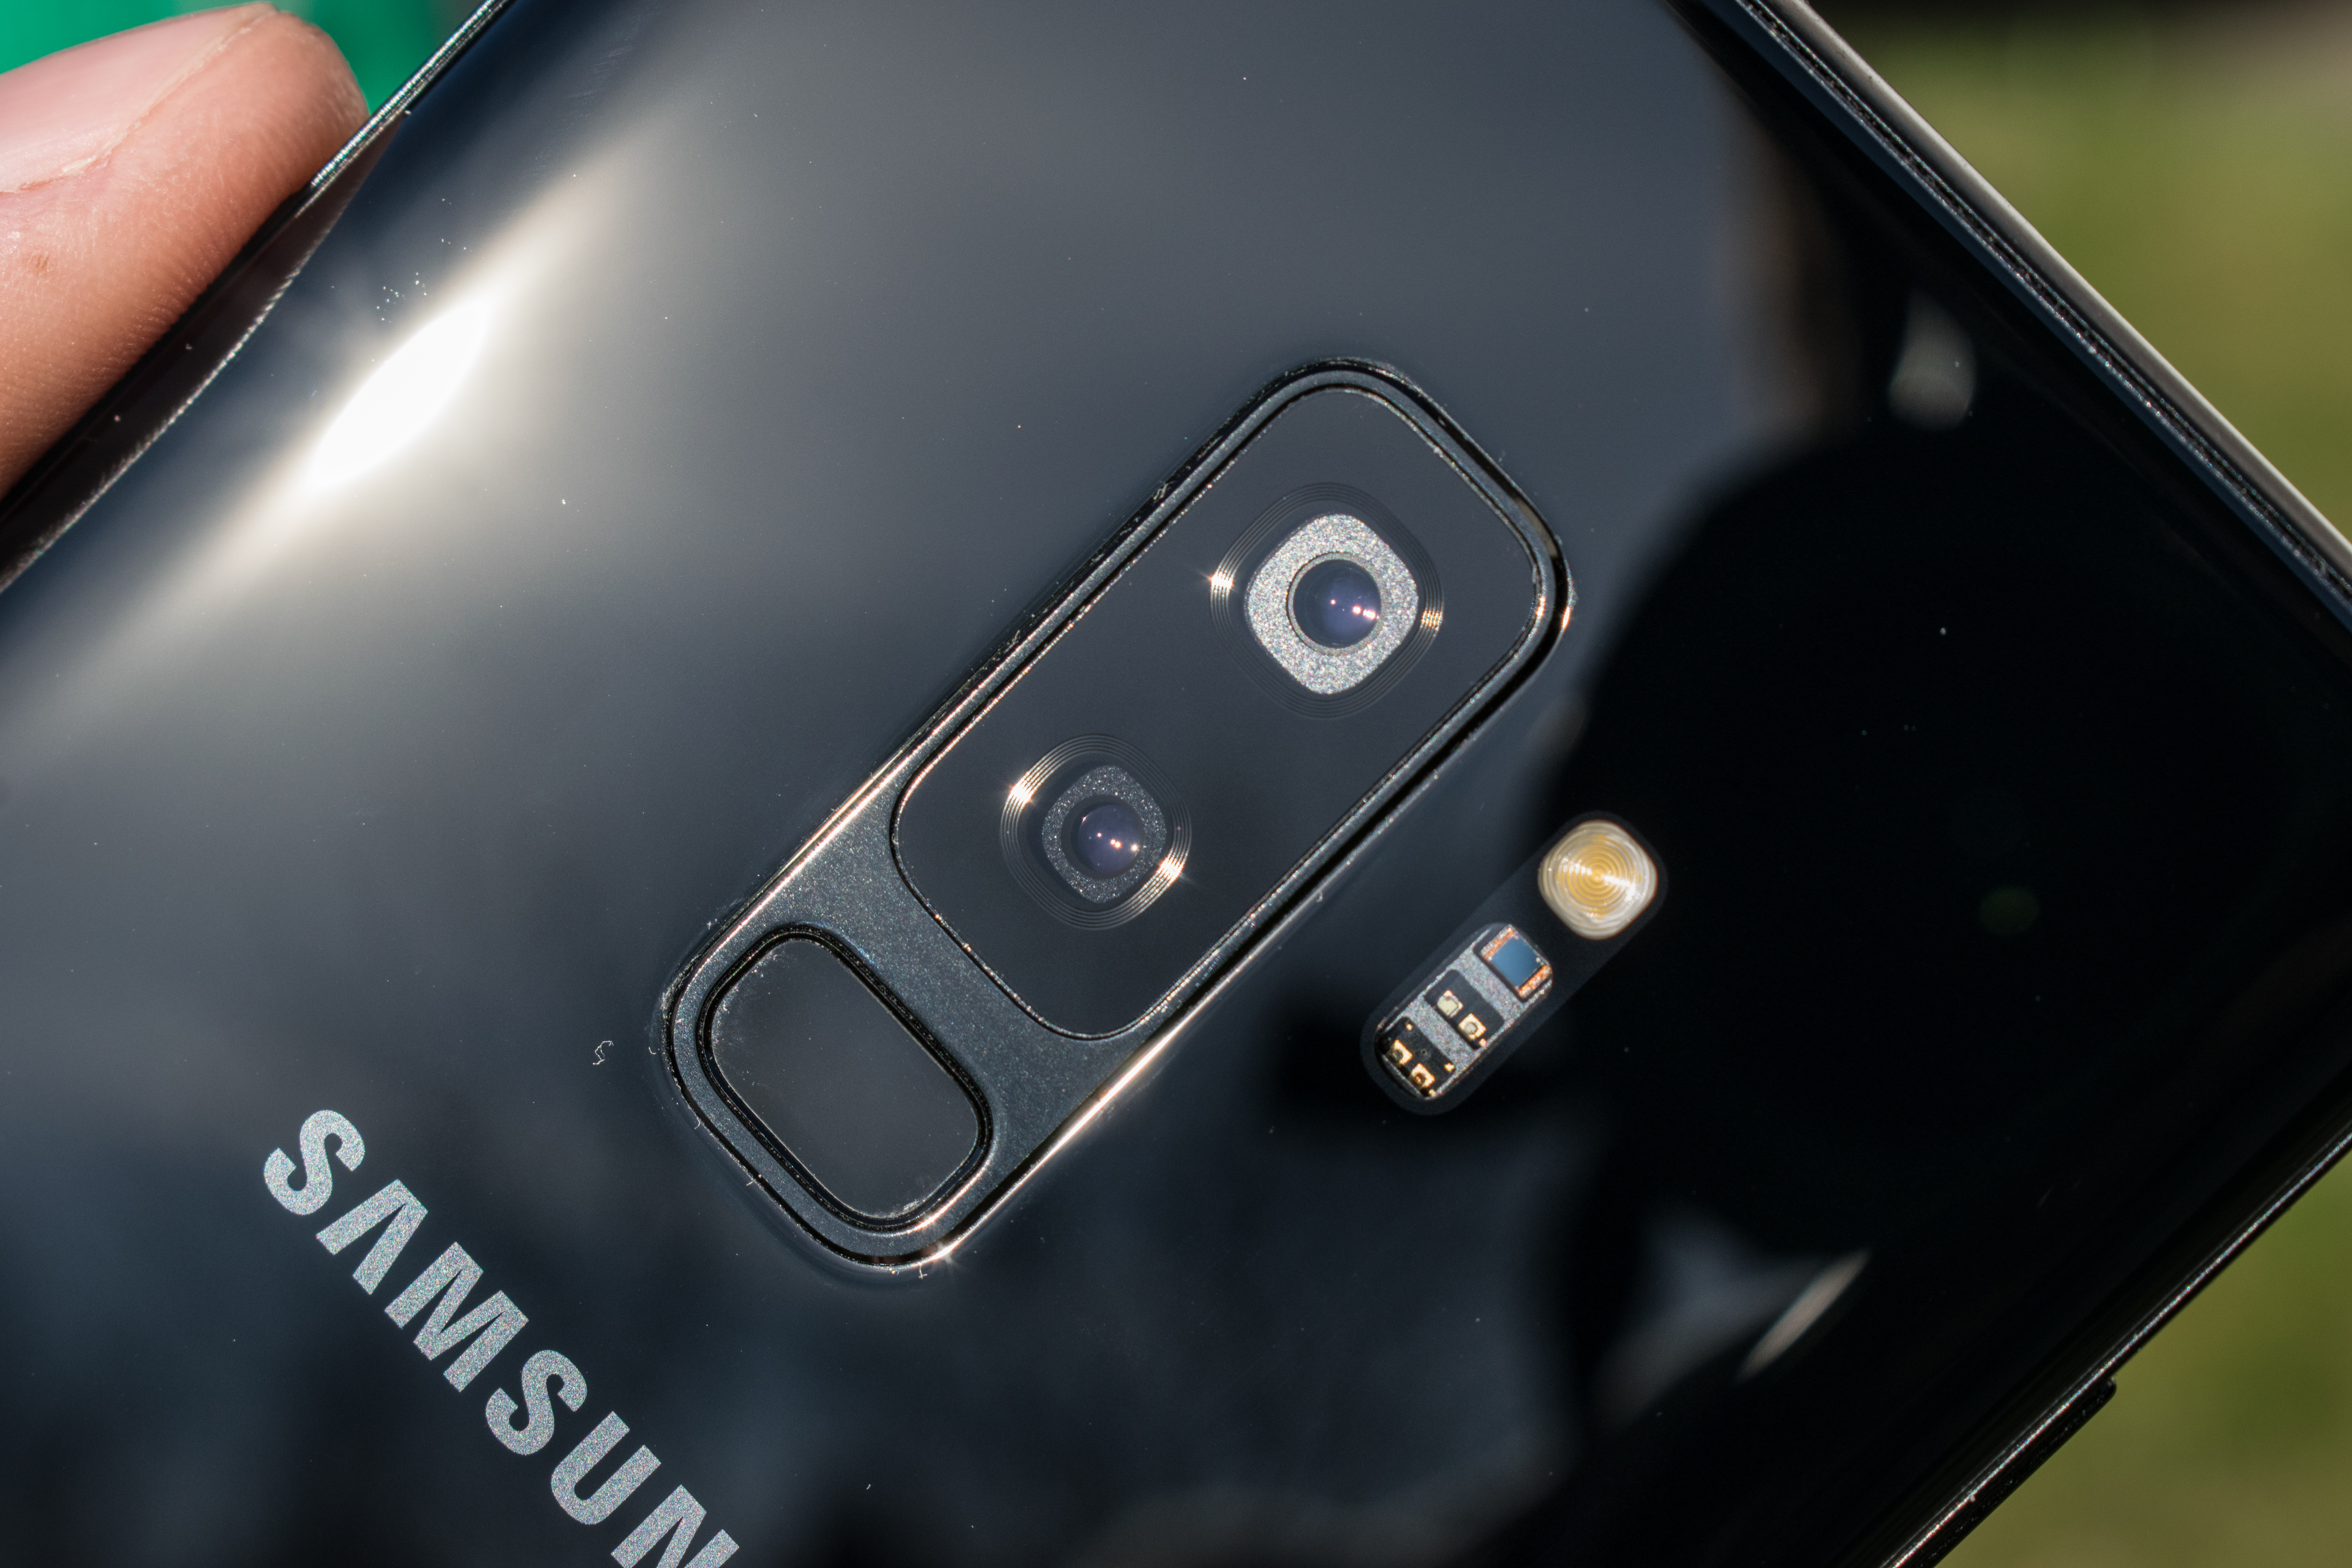 The Samsung Galaxy S9 and S9+ Review: Exynos and Snapdragon